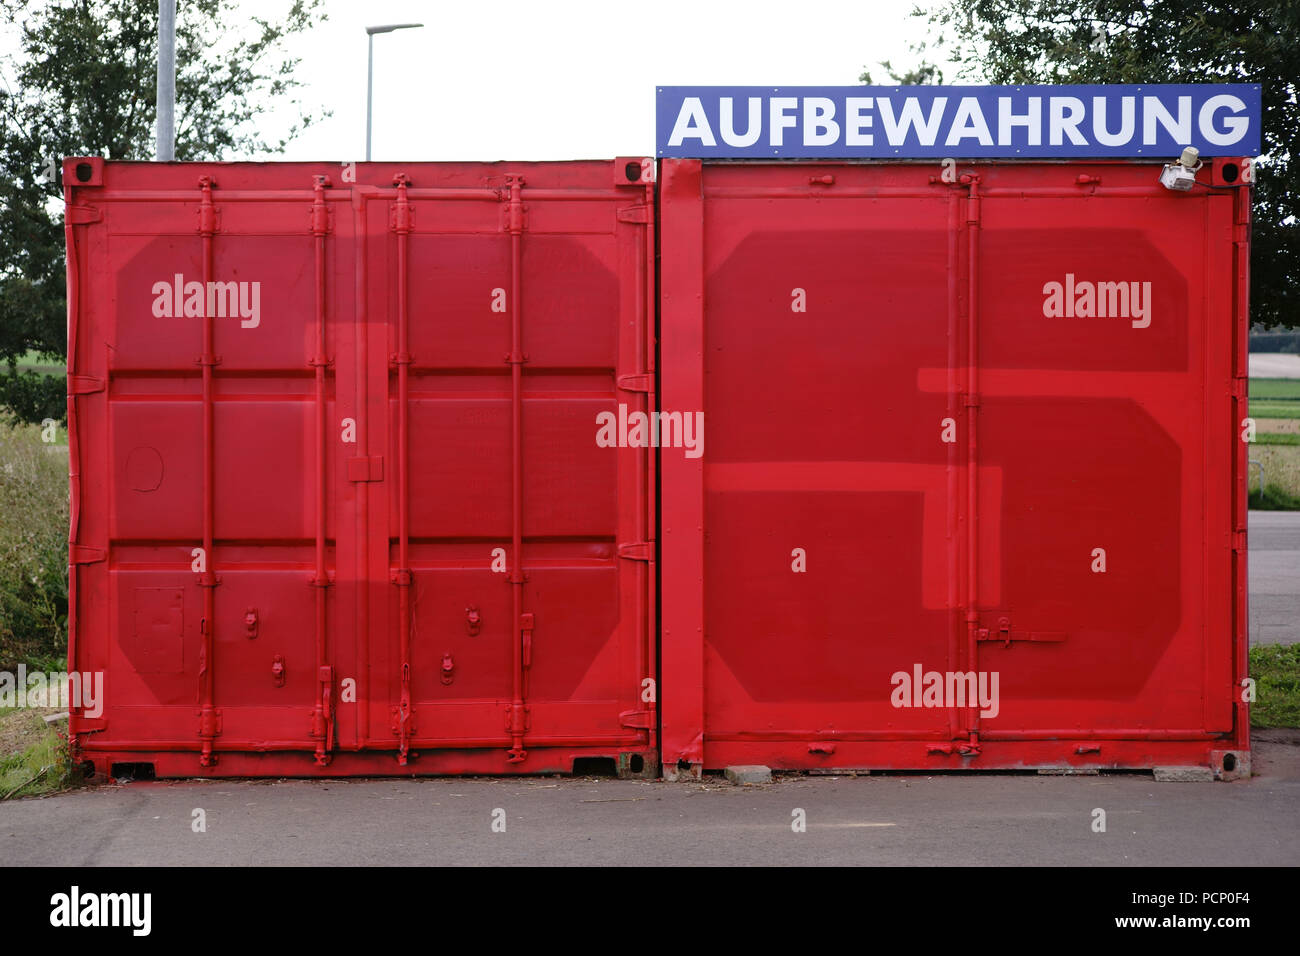 The front view of a cargo container of the 1. FSV Mainz 05 in the Opel Arena for storaging materials and valuable articles Stock Photo